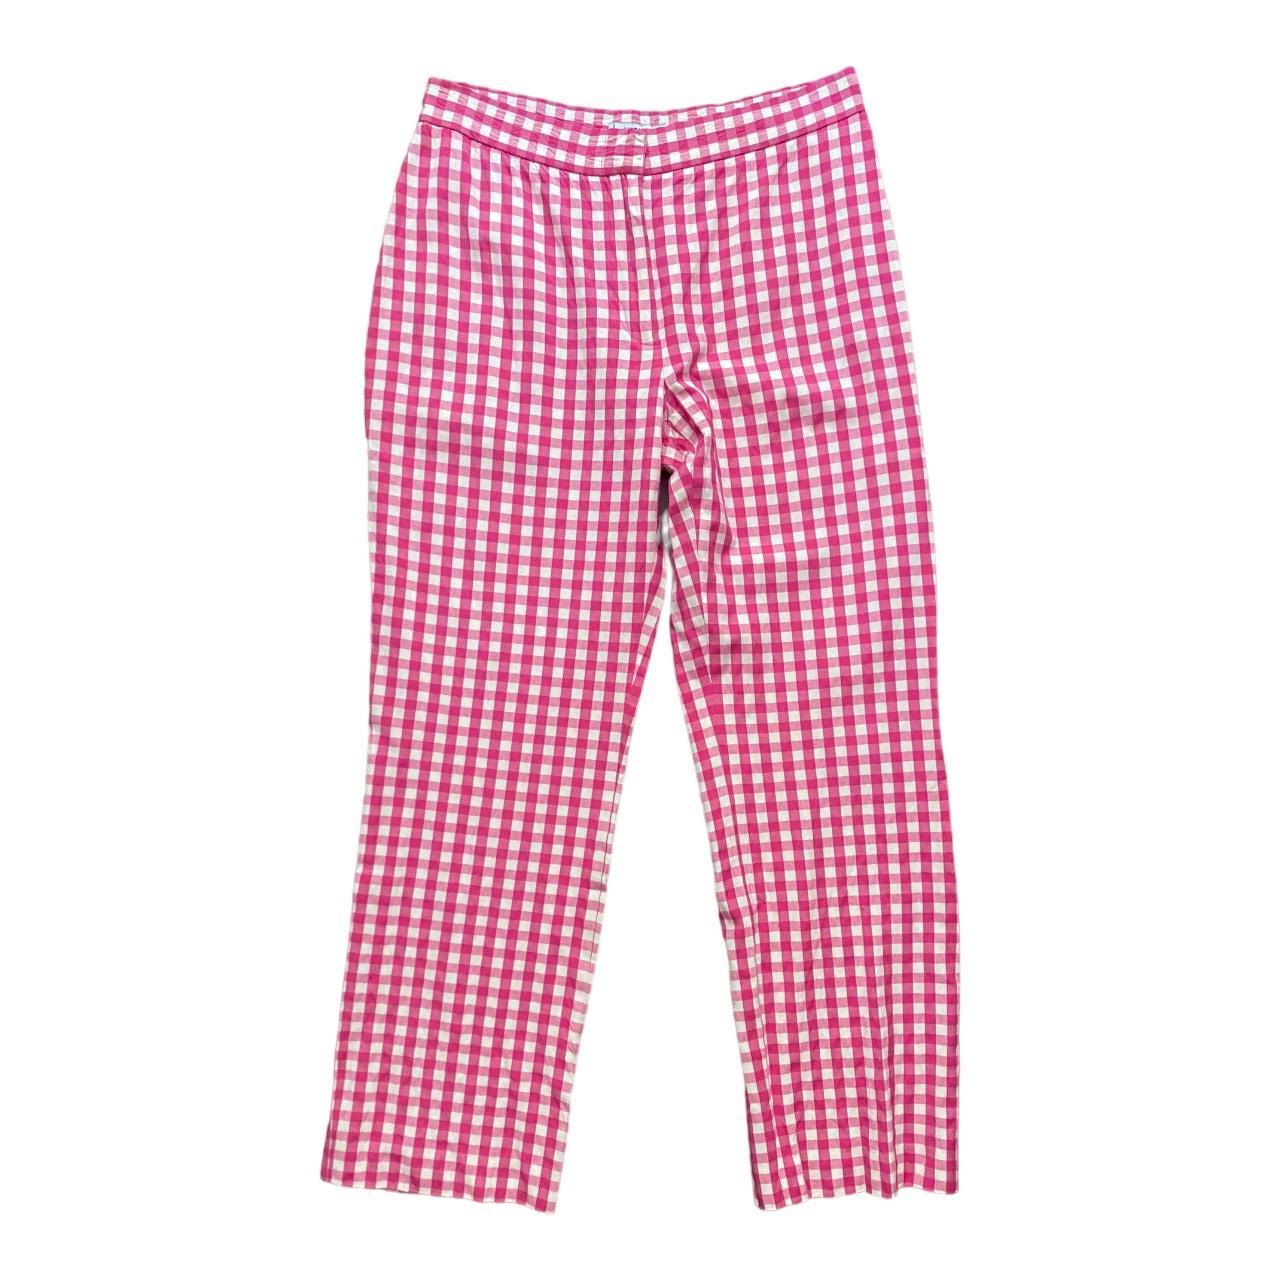 Moschino Cheap & Chic Women's Pink and White Trousers